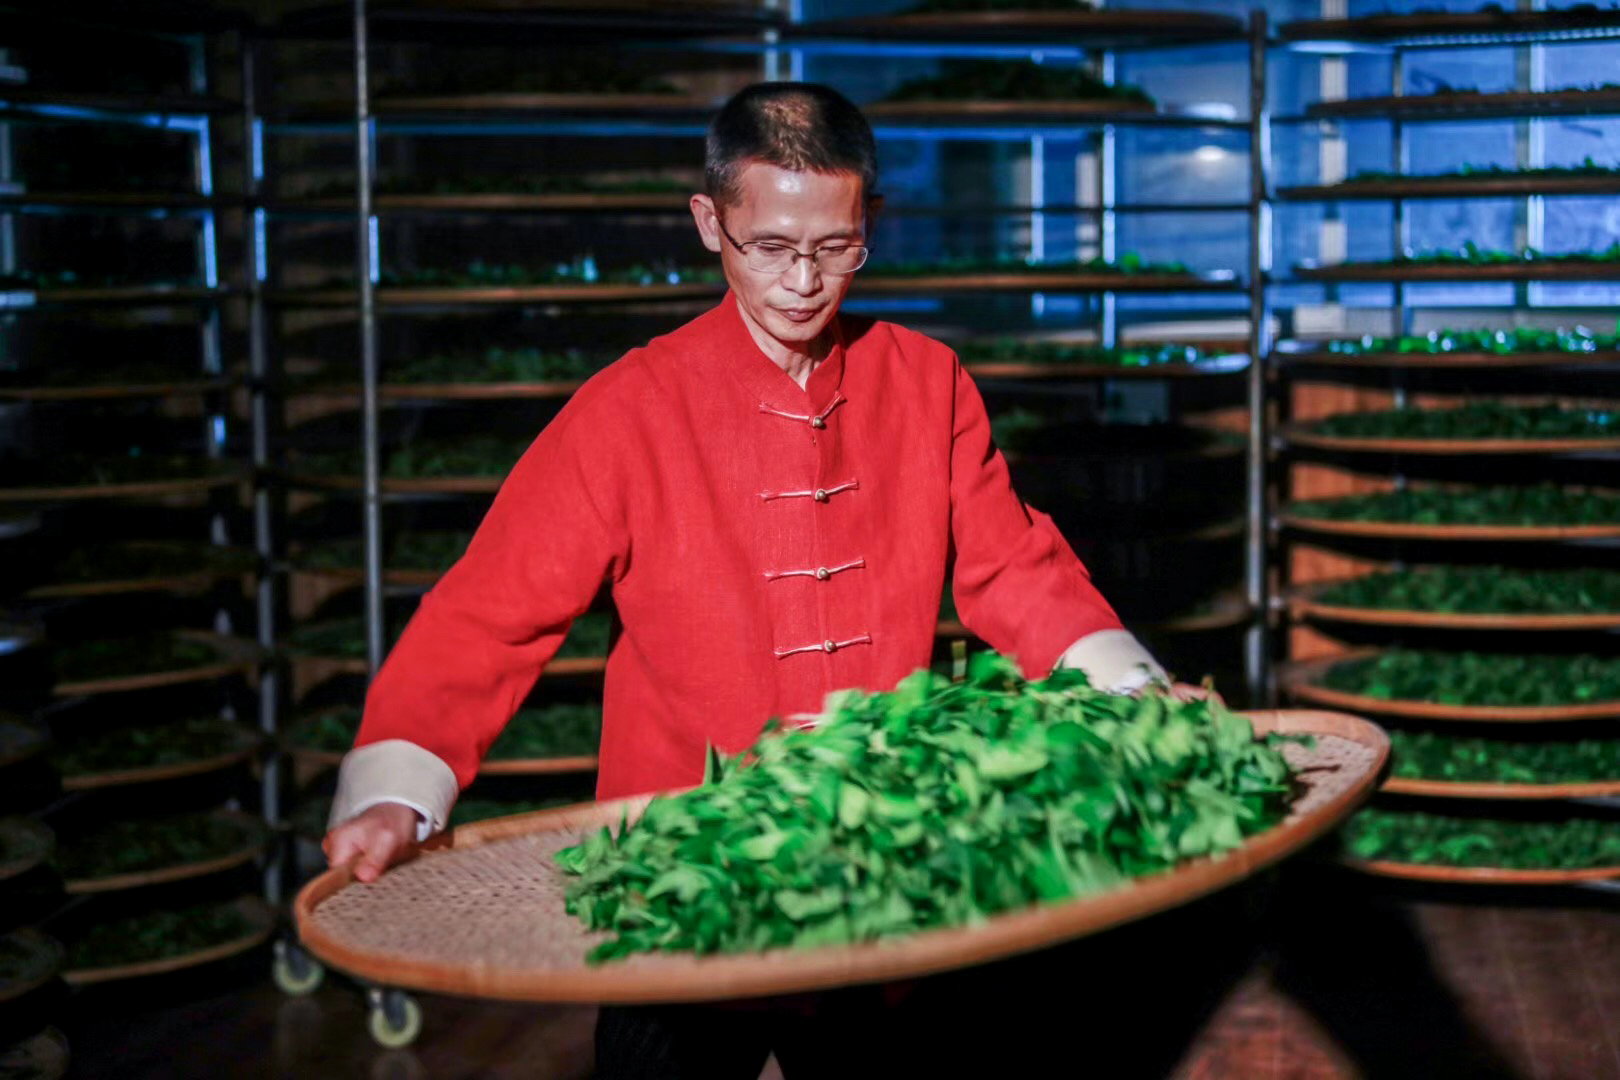 A man in a formal red jacket tossing tea leaves on a large flat bamboo tray, with dozens more trays on racks behind him.